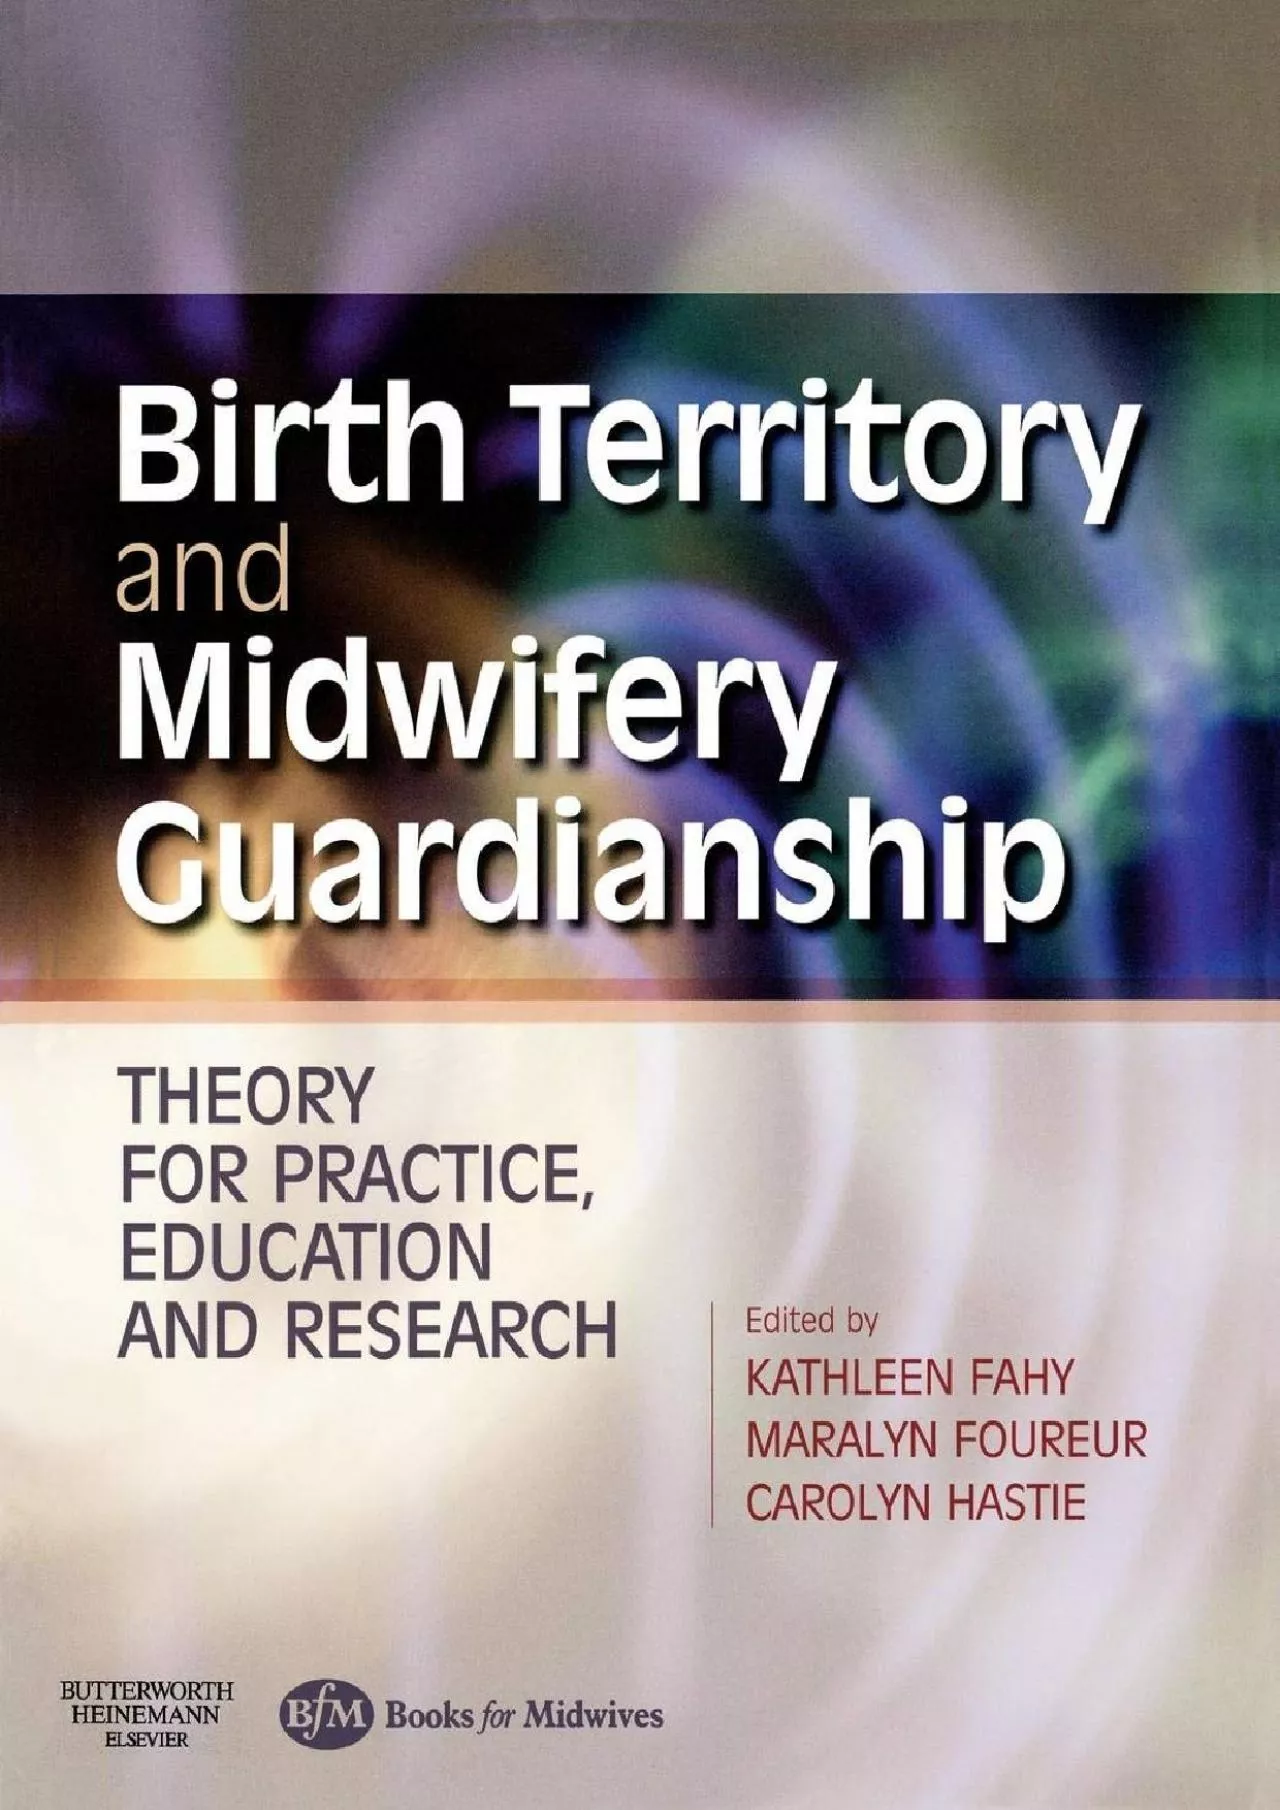 (BOOK)-Birth Territory and Midwifery Guardianship: Theory for Practice, Education and